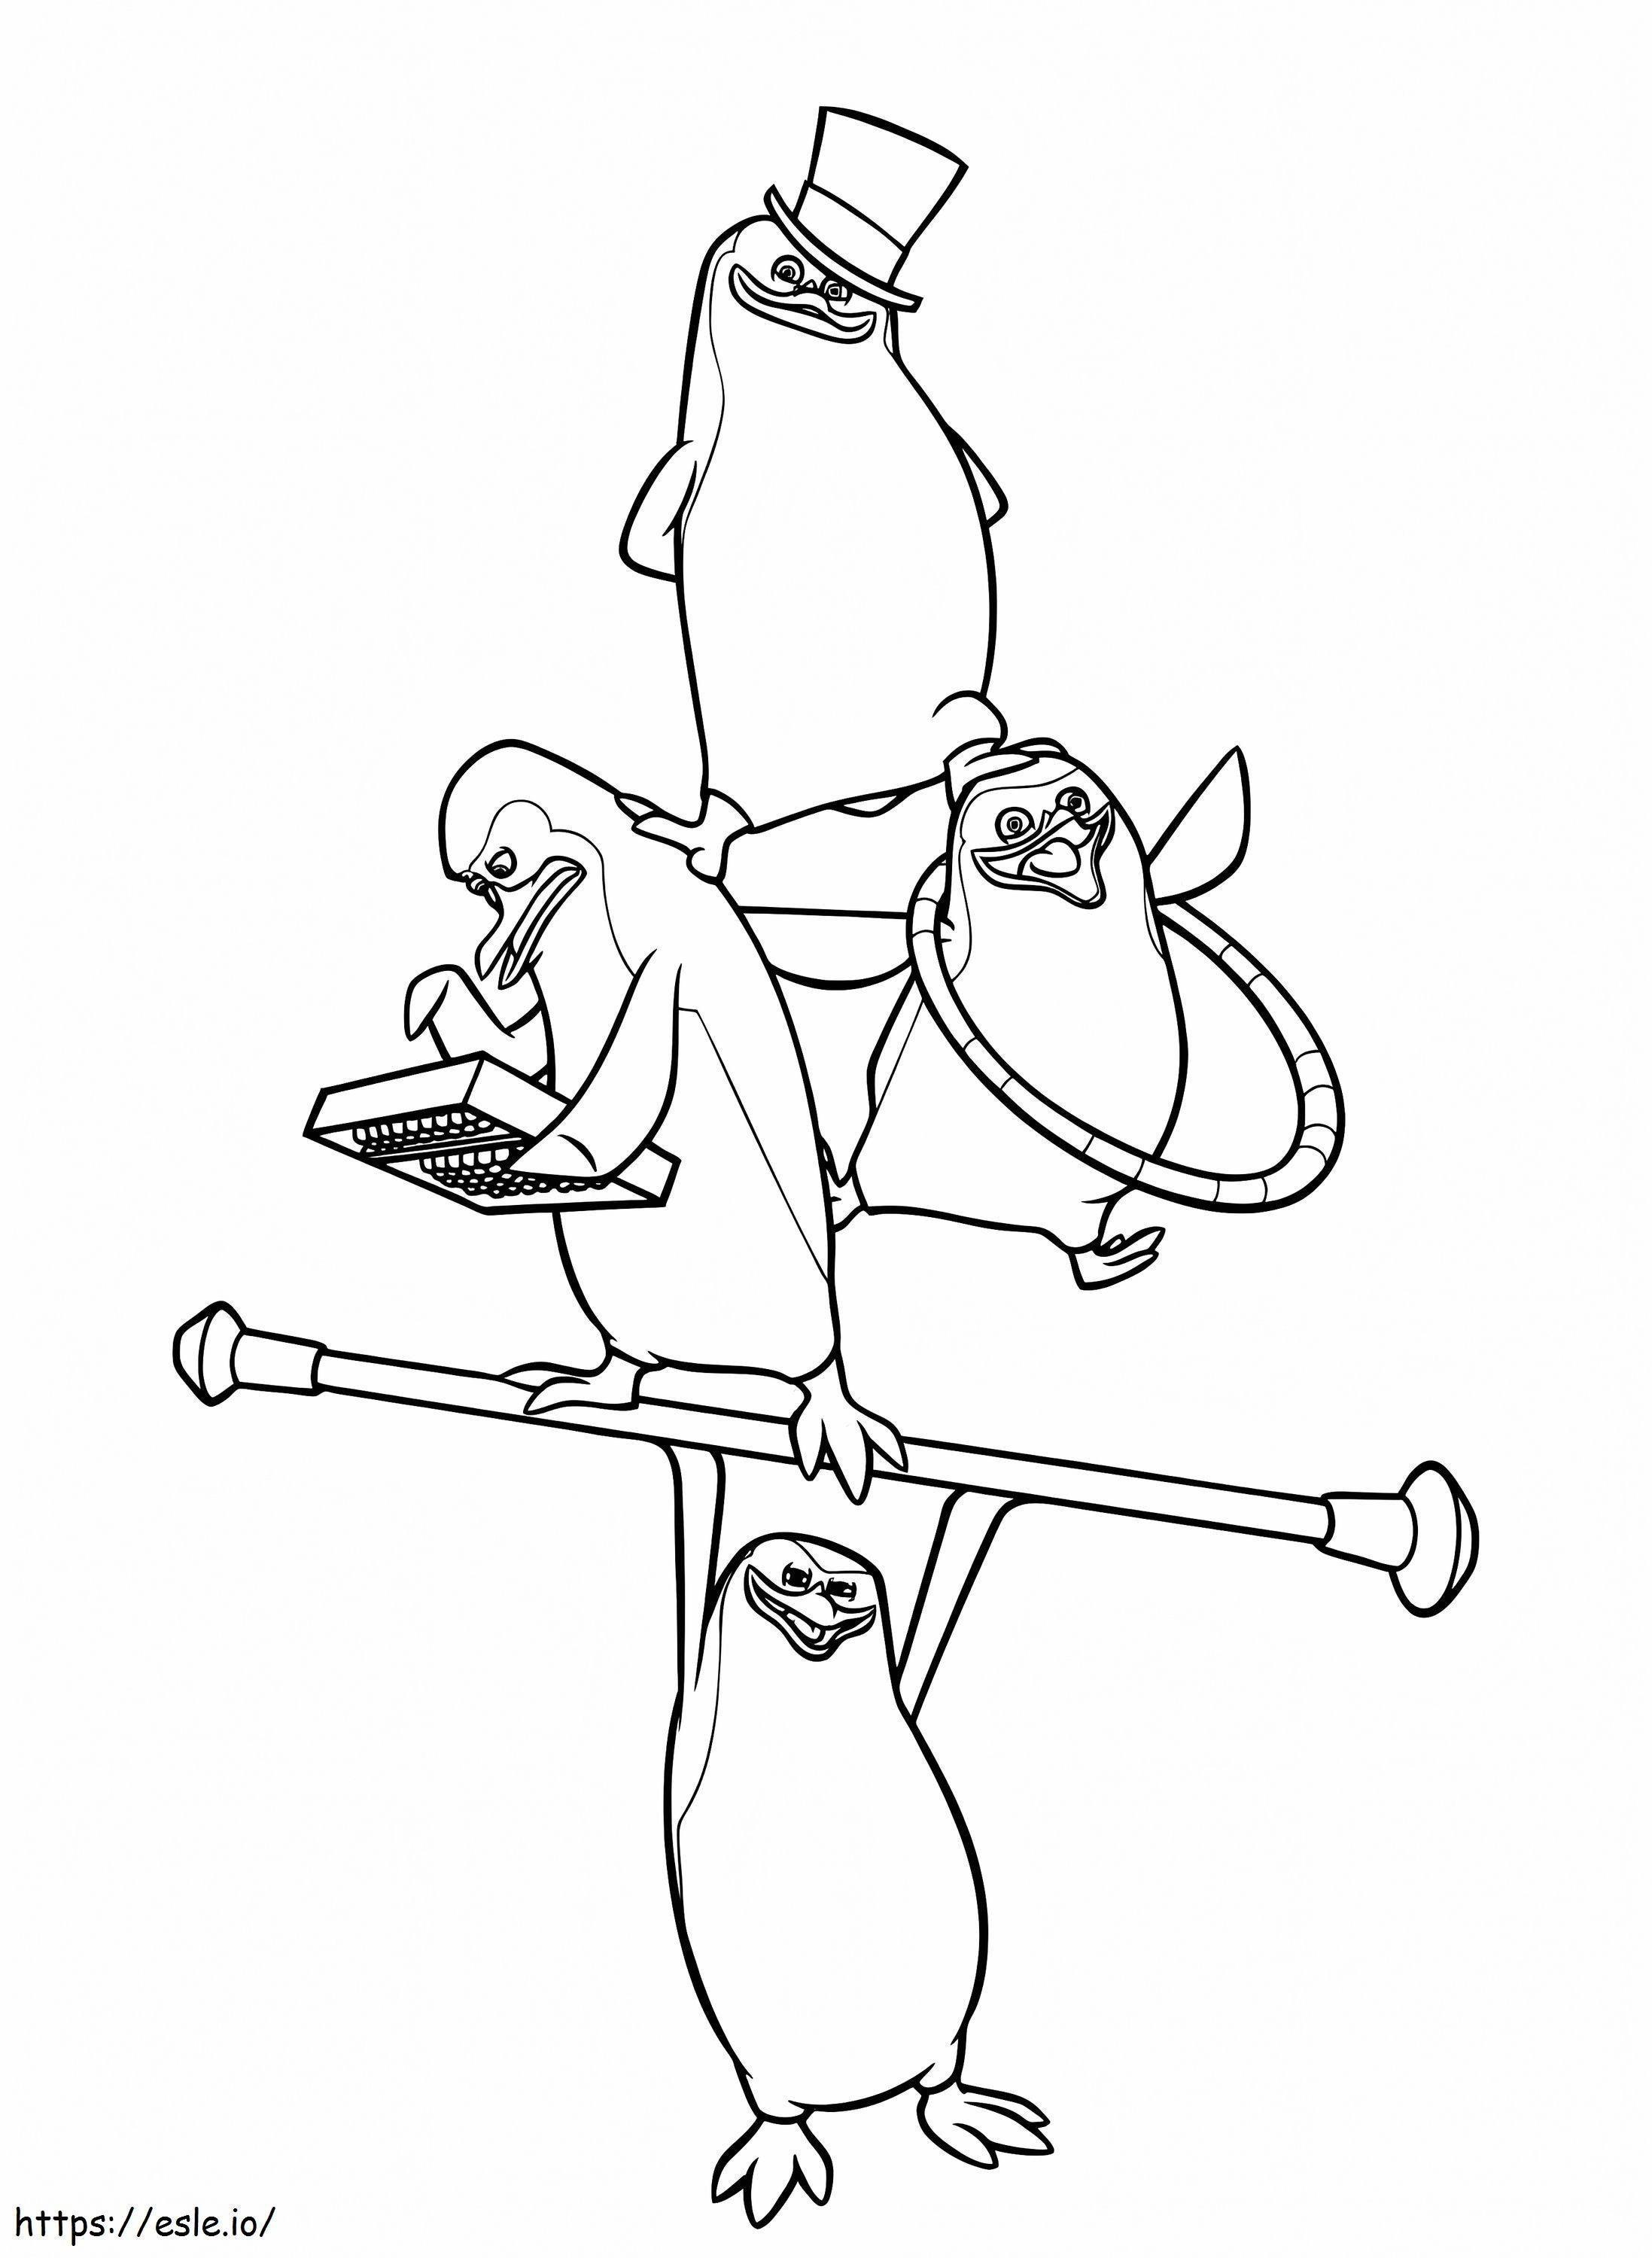 Penguins Of Madagascar To Color coloring page